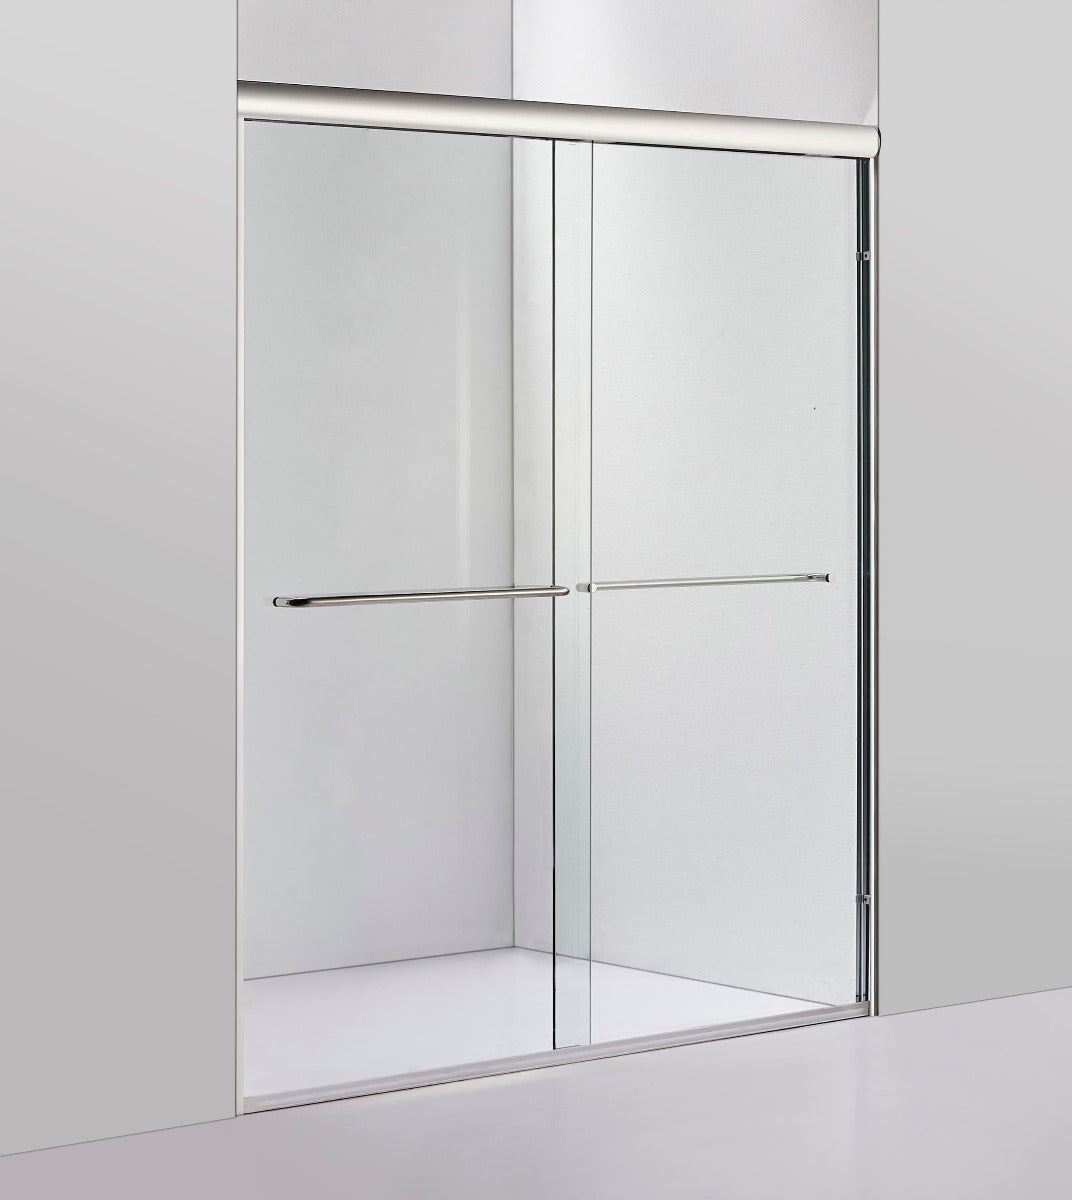 Ratel BYPASS SHOWER GLASS DOOR (8MM) THICK TEMPERED GLASS 60"W X 76"H - Brushed Nickel